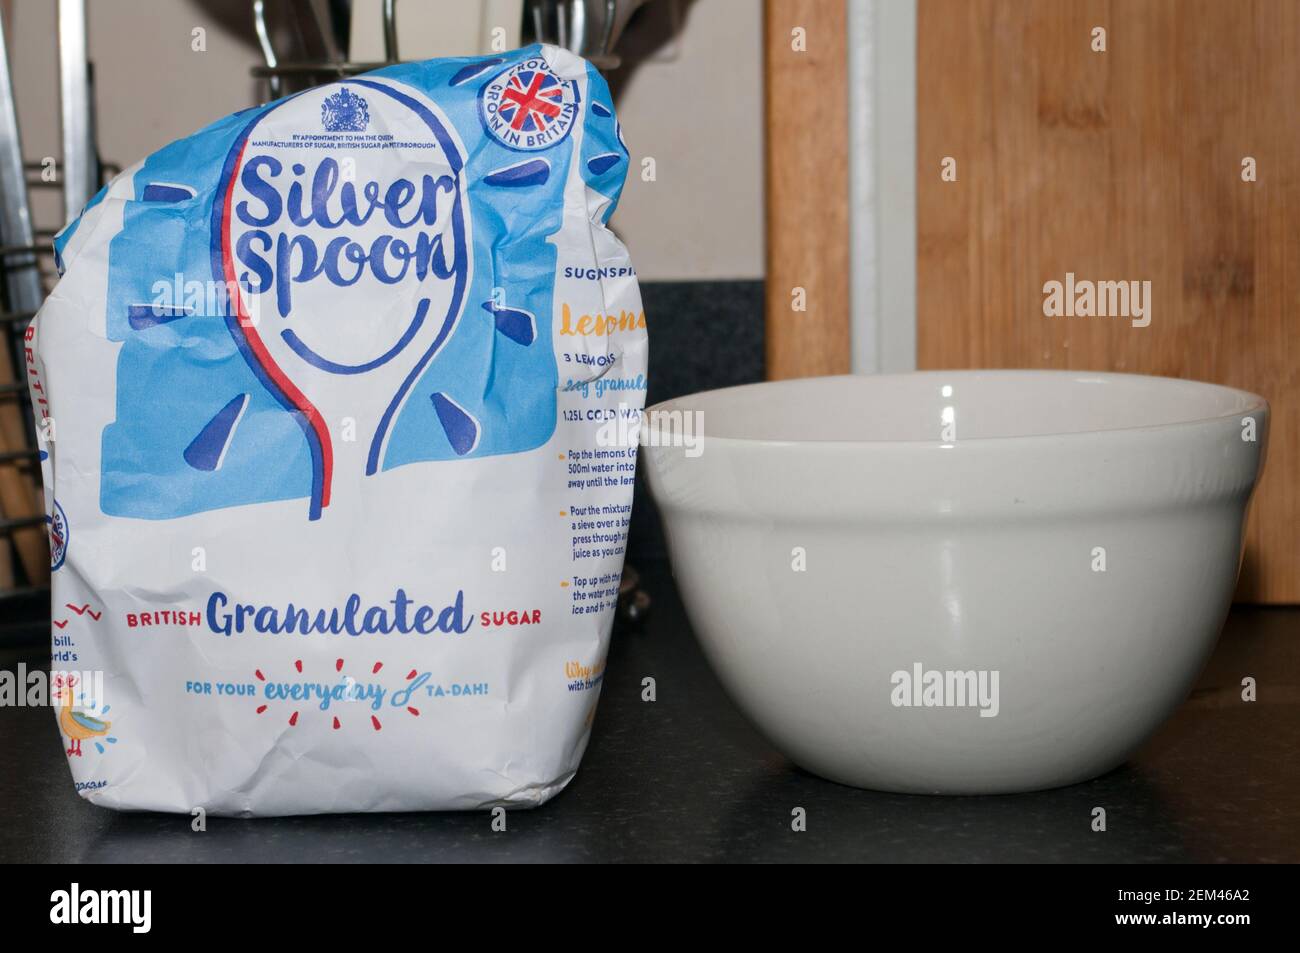 Pack of Silver Spoon Granulated Sugar Stock Photo